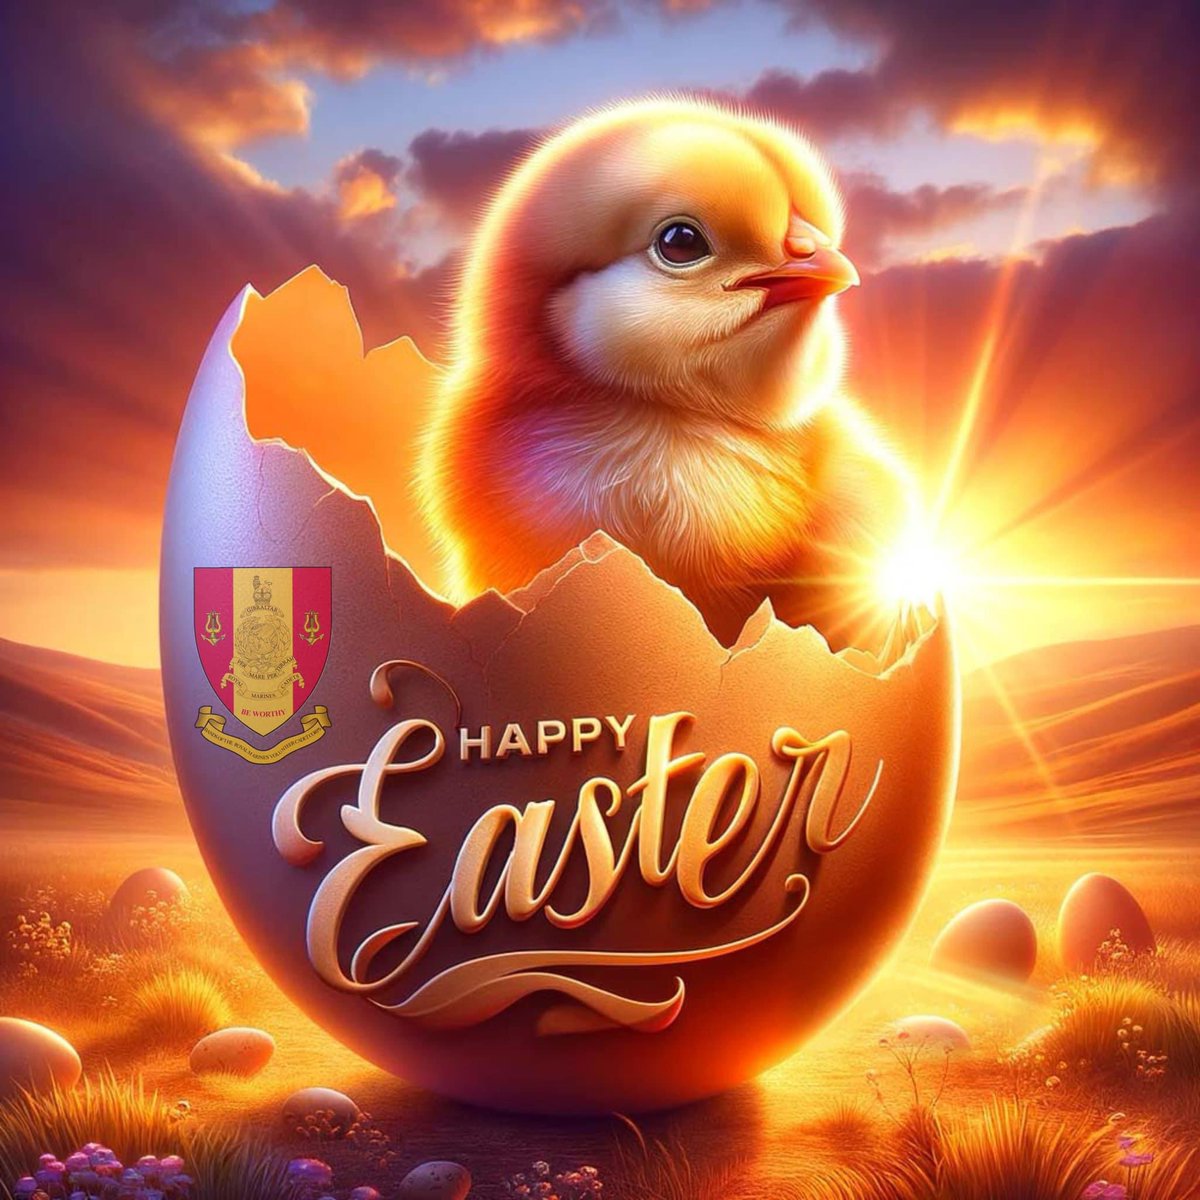 Wishing all our followers a Happy Easter, Thankyou for your continued support 🐣